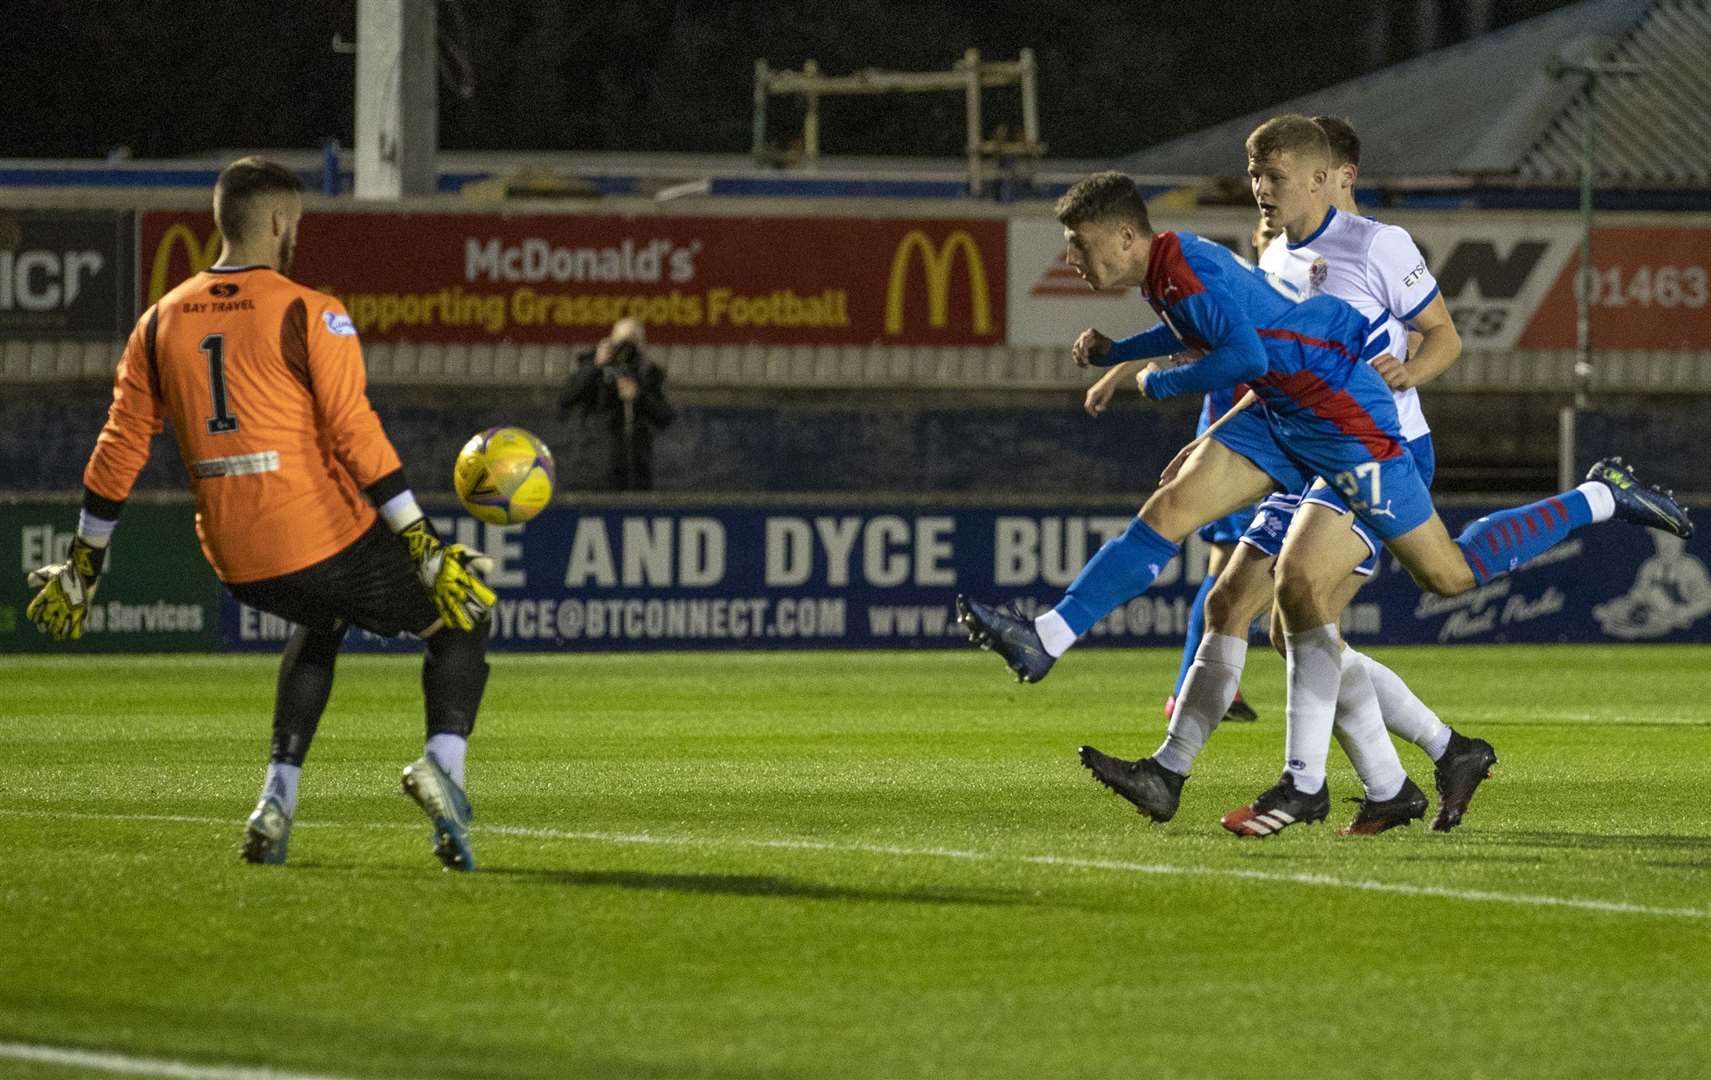 Daniel Mackay has not scored for ICT since July 2018, but a loan at Elgin last season seems to have given him confidence in spades.